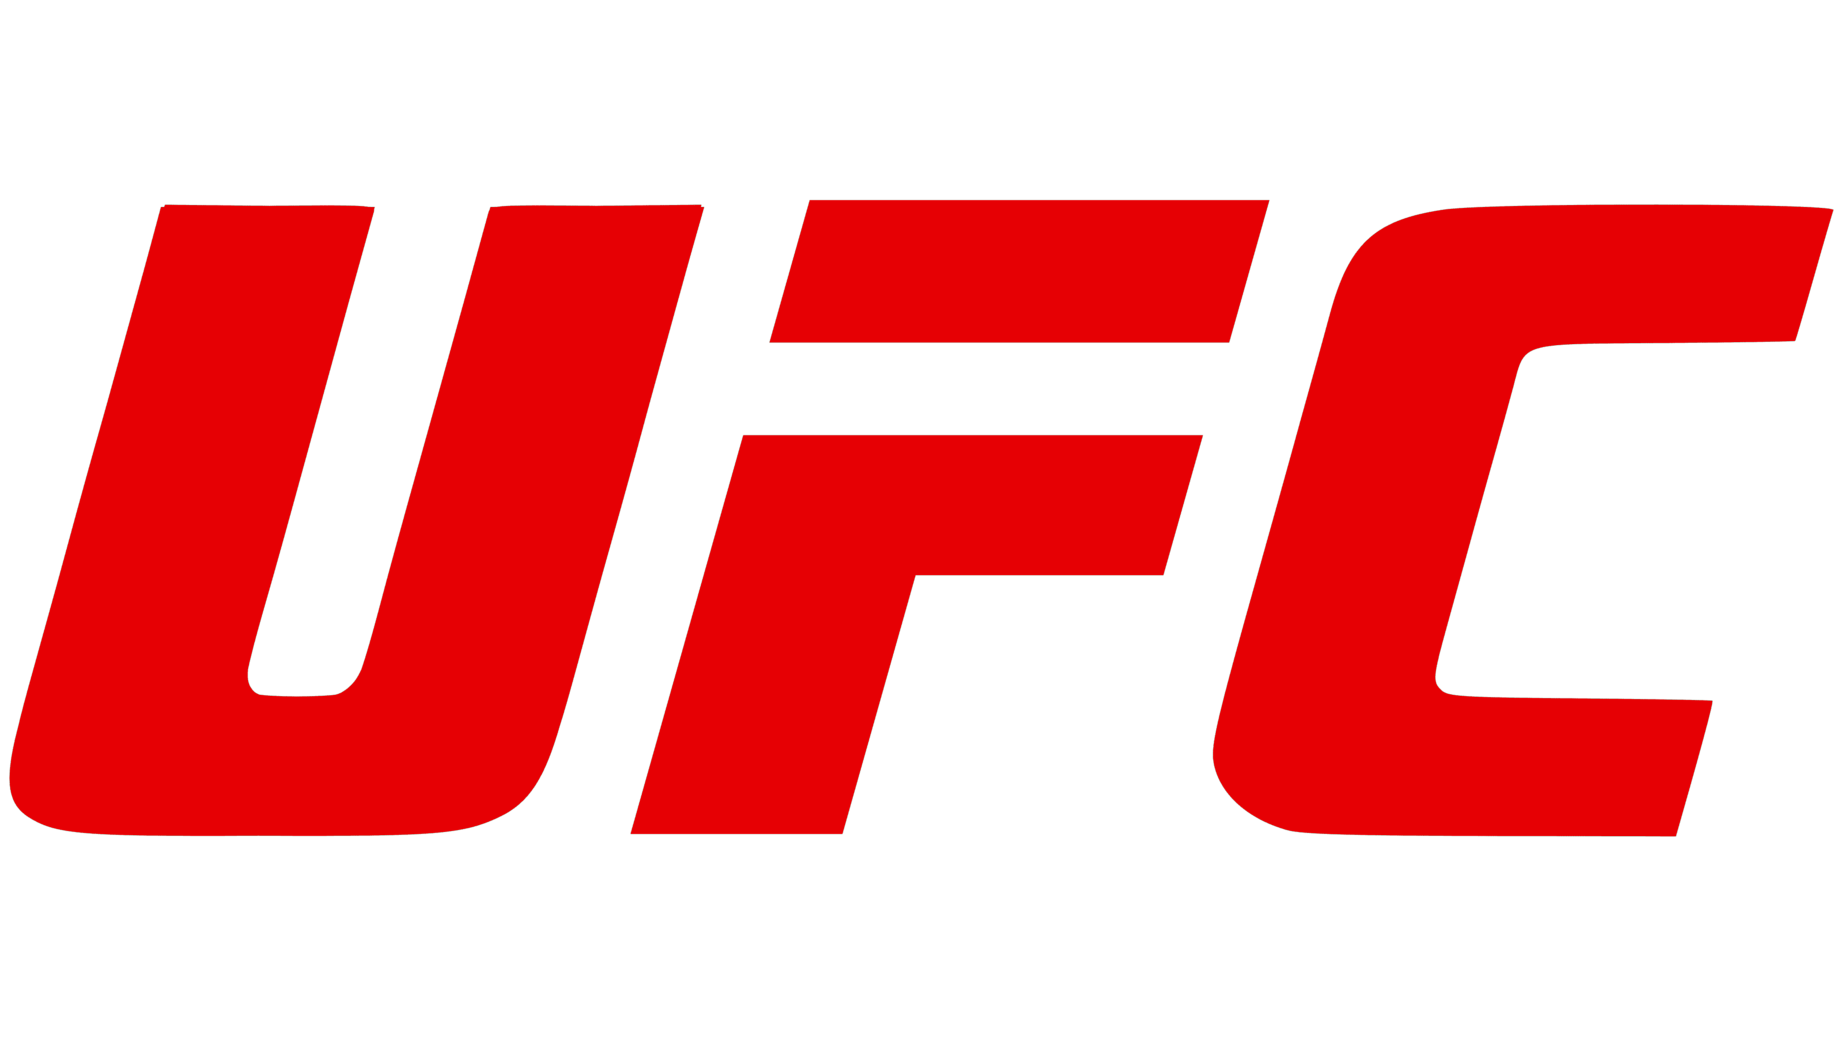 Ultimate fighting championship ufc sign